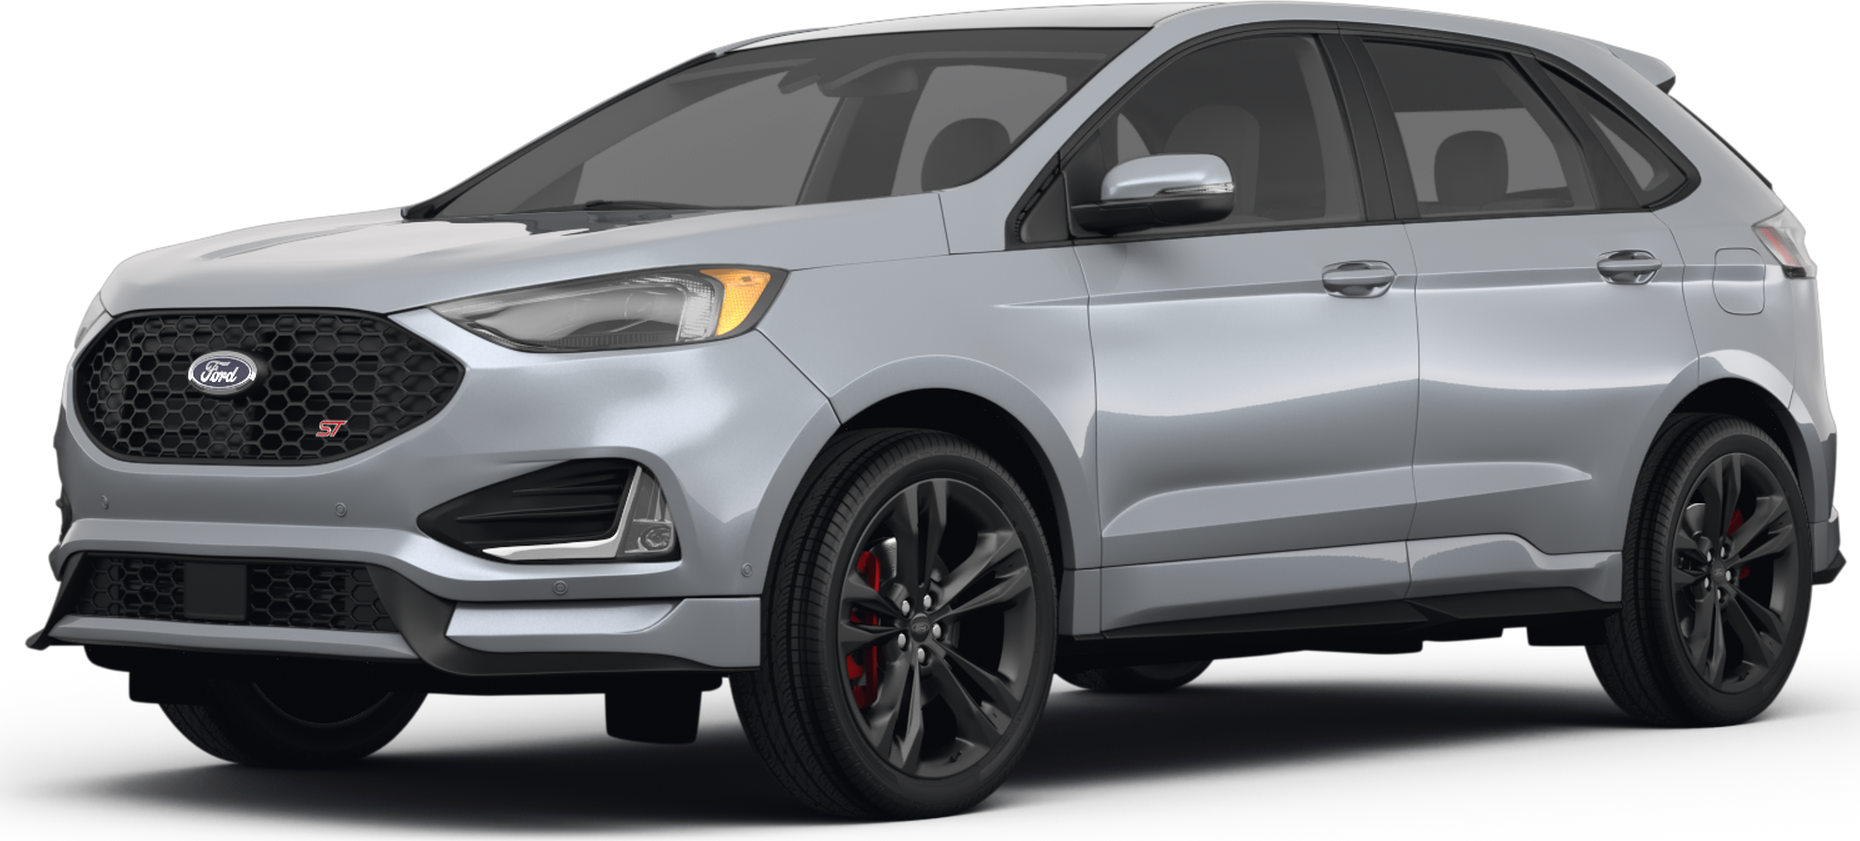 2024 Ford Edge Review, Specs, & Colors - Westfield Ford